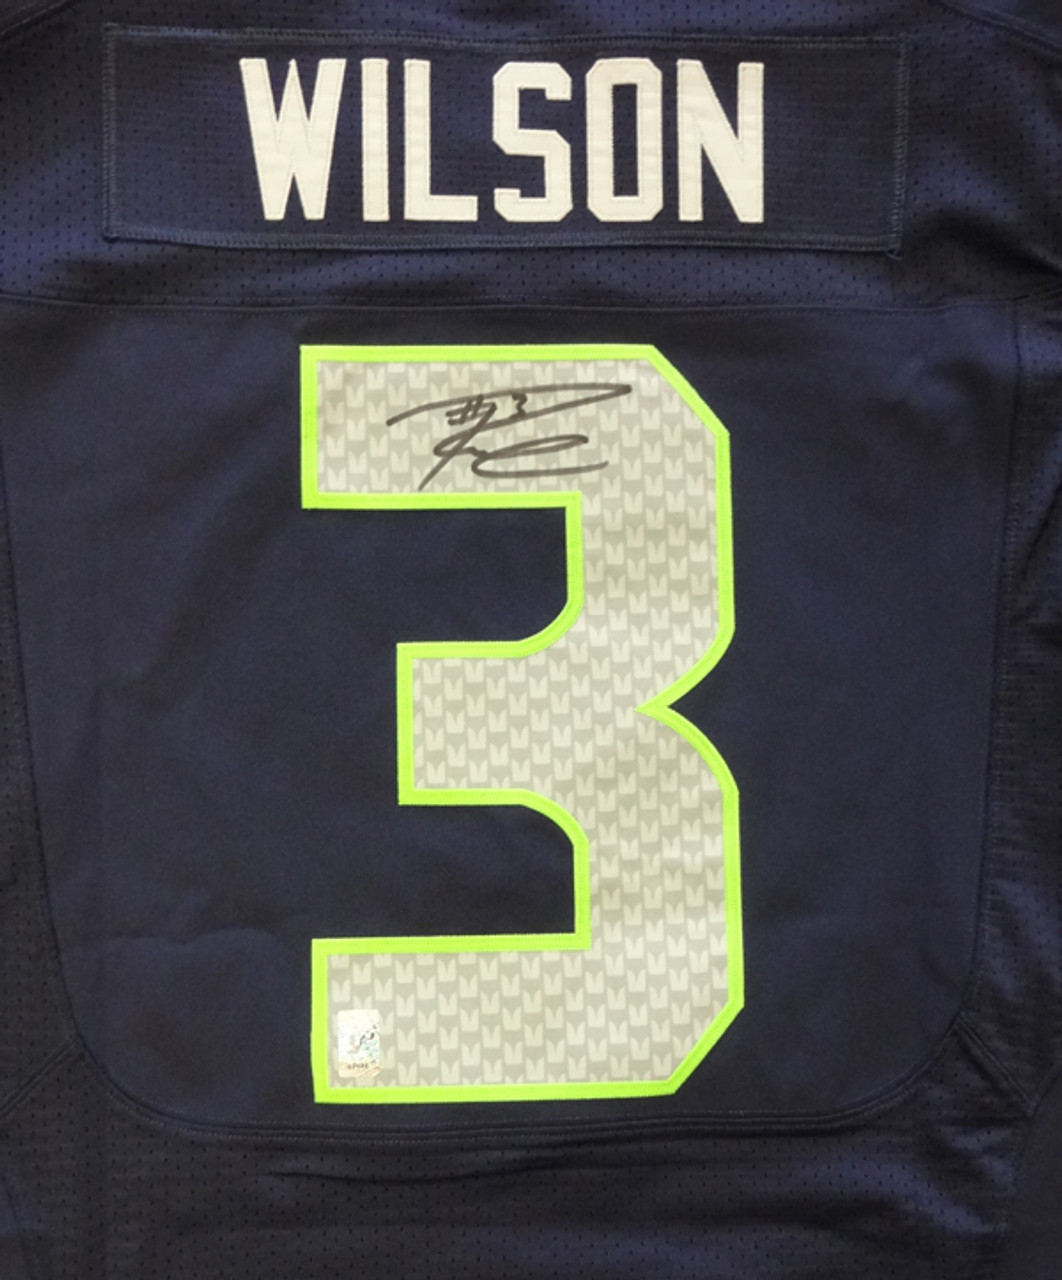 what is the c on russell wilson's jersey